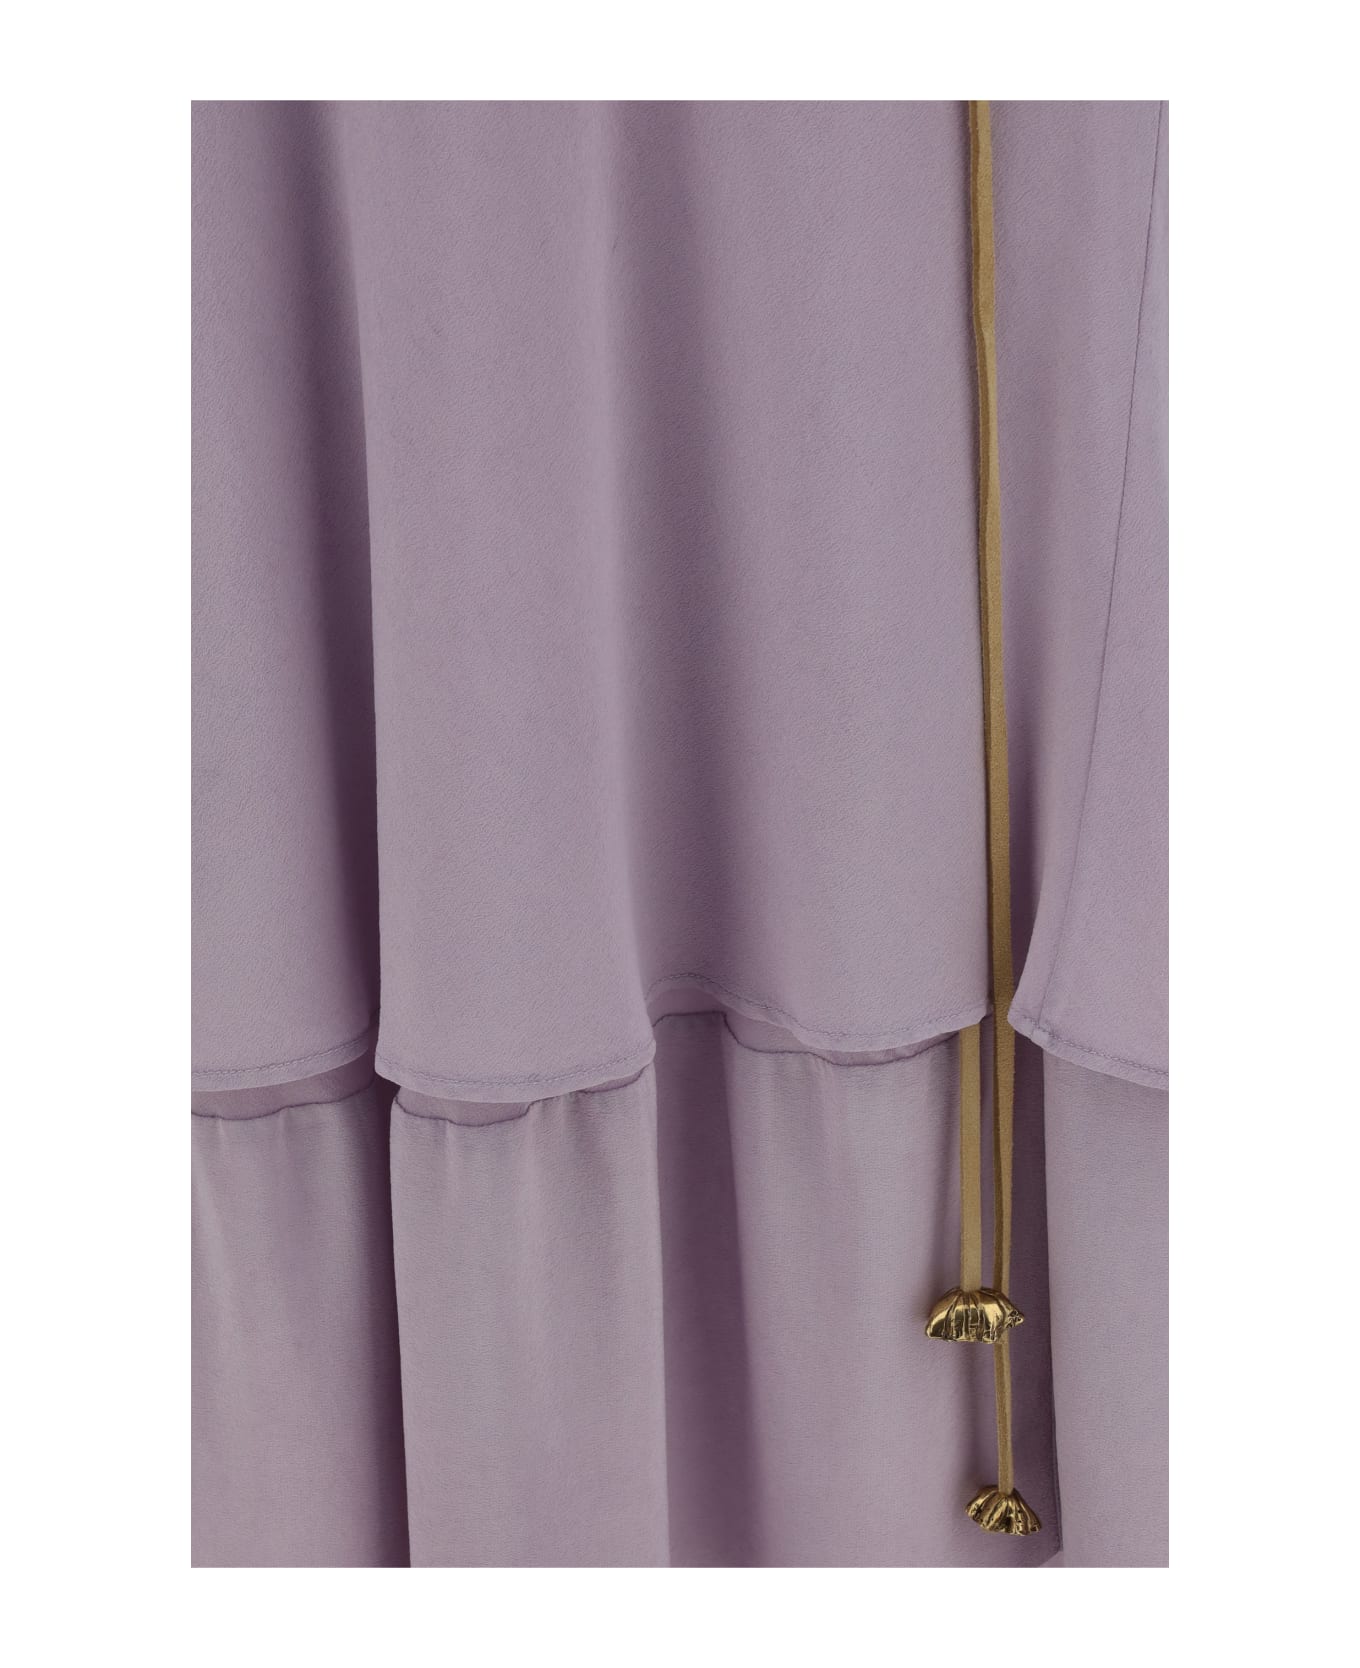 Quira Skirt - Misty Lilac